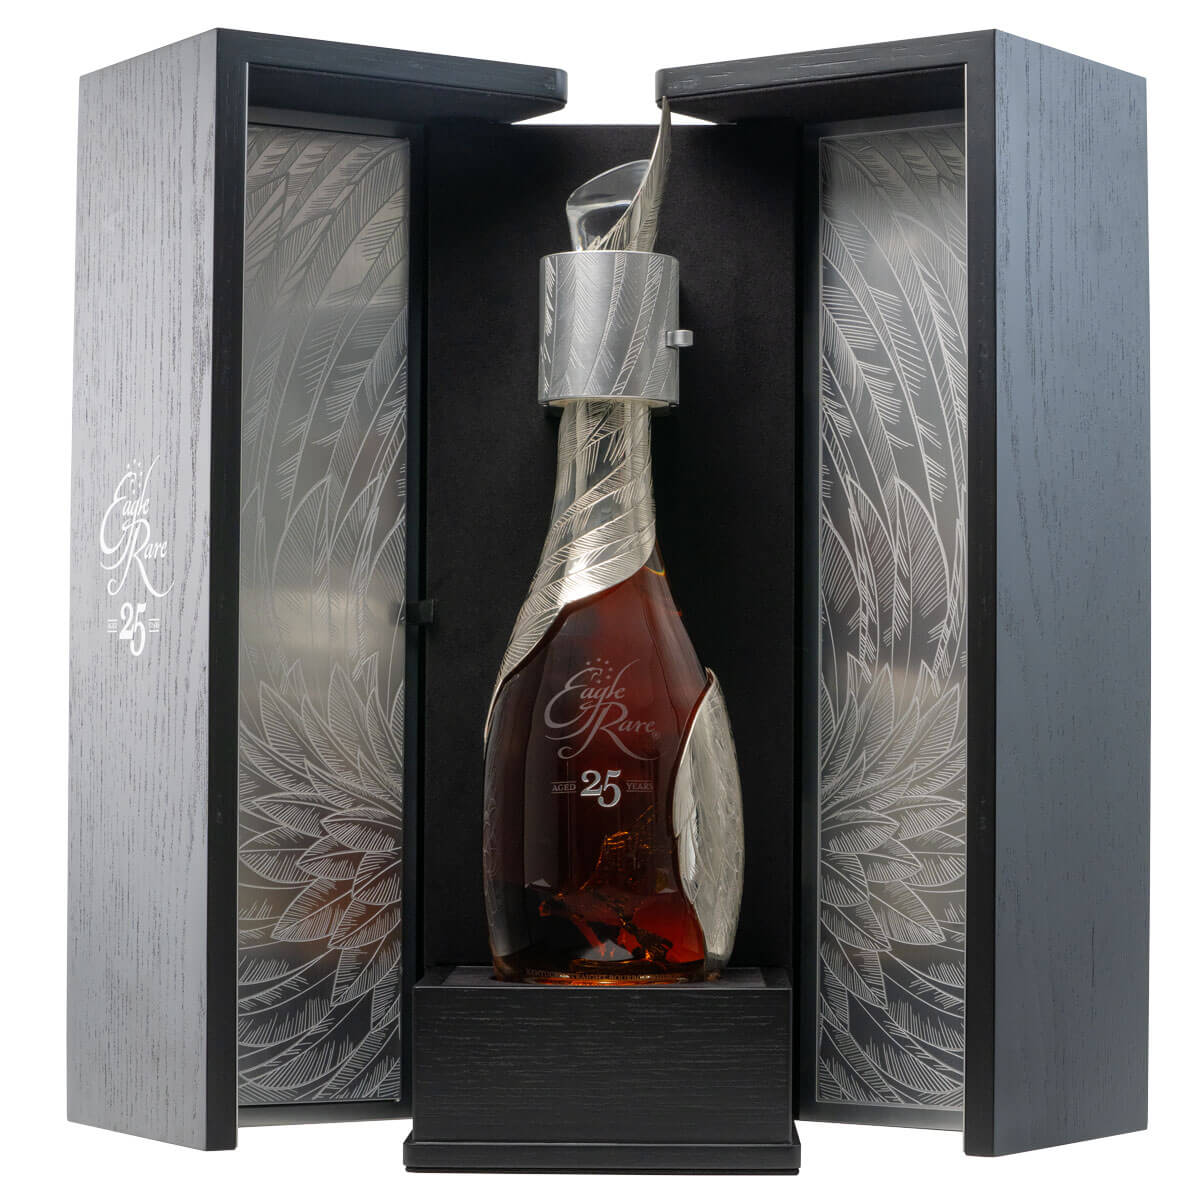 Eagle Rare 25 packaging